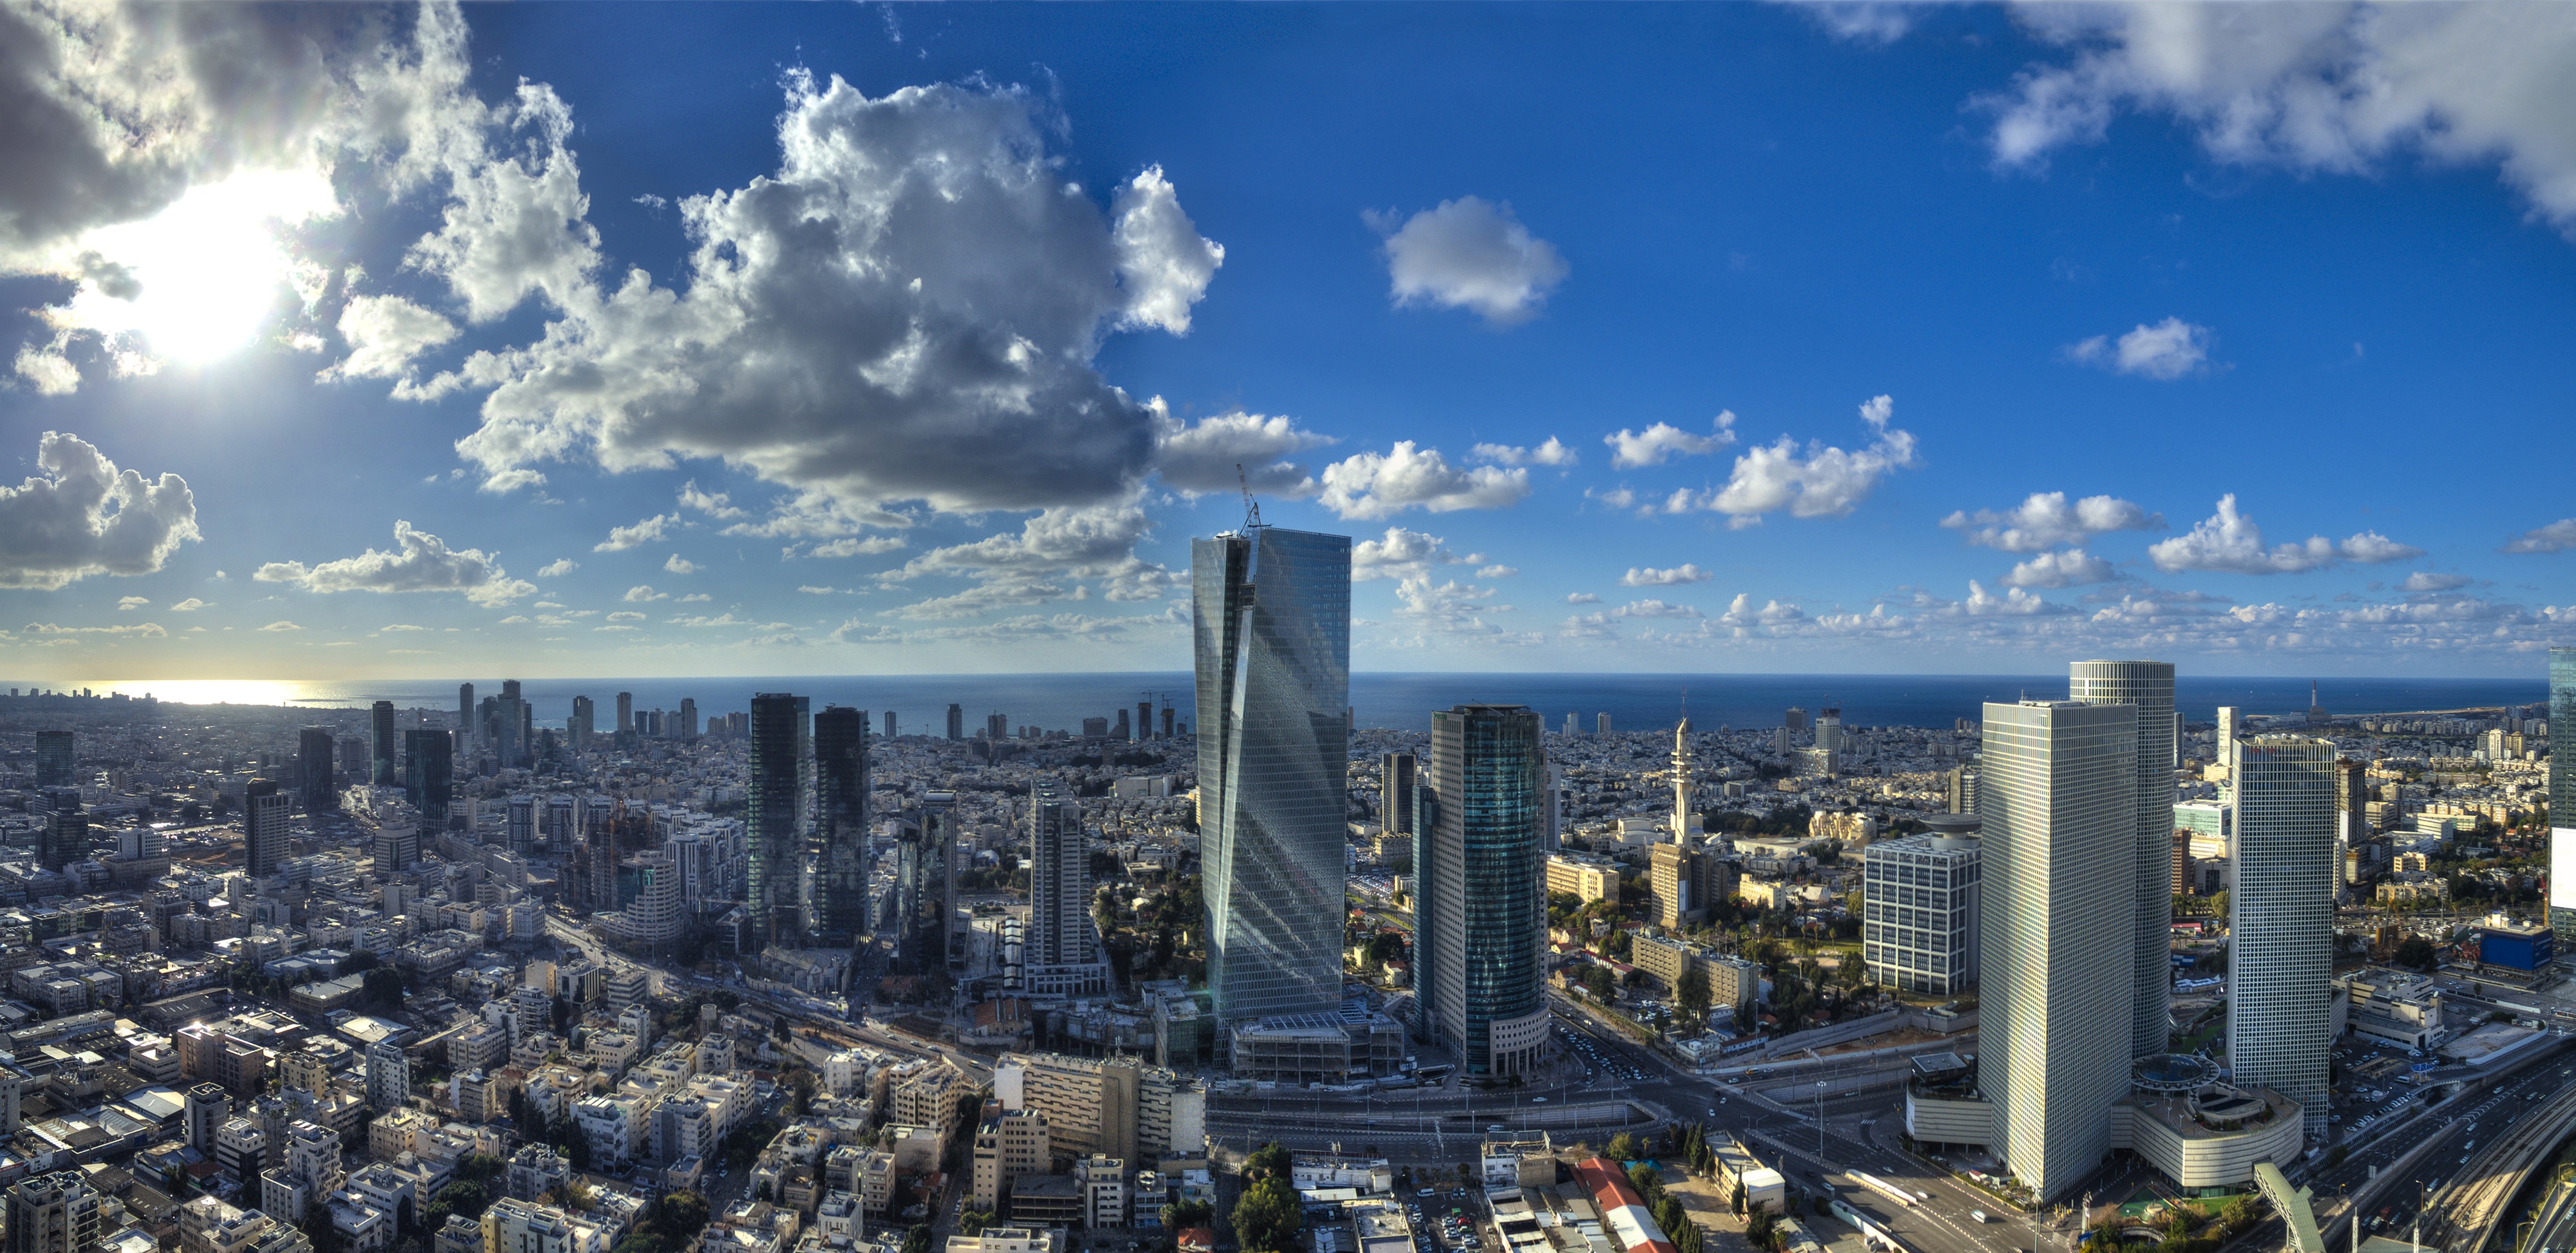 The skyline of Tel Aviv, the financial centre of Israel and its second most populous city after Jerusalem. Photo: Shutterstock